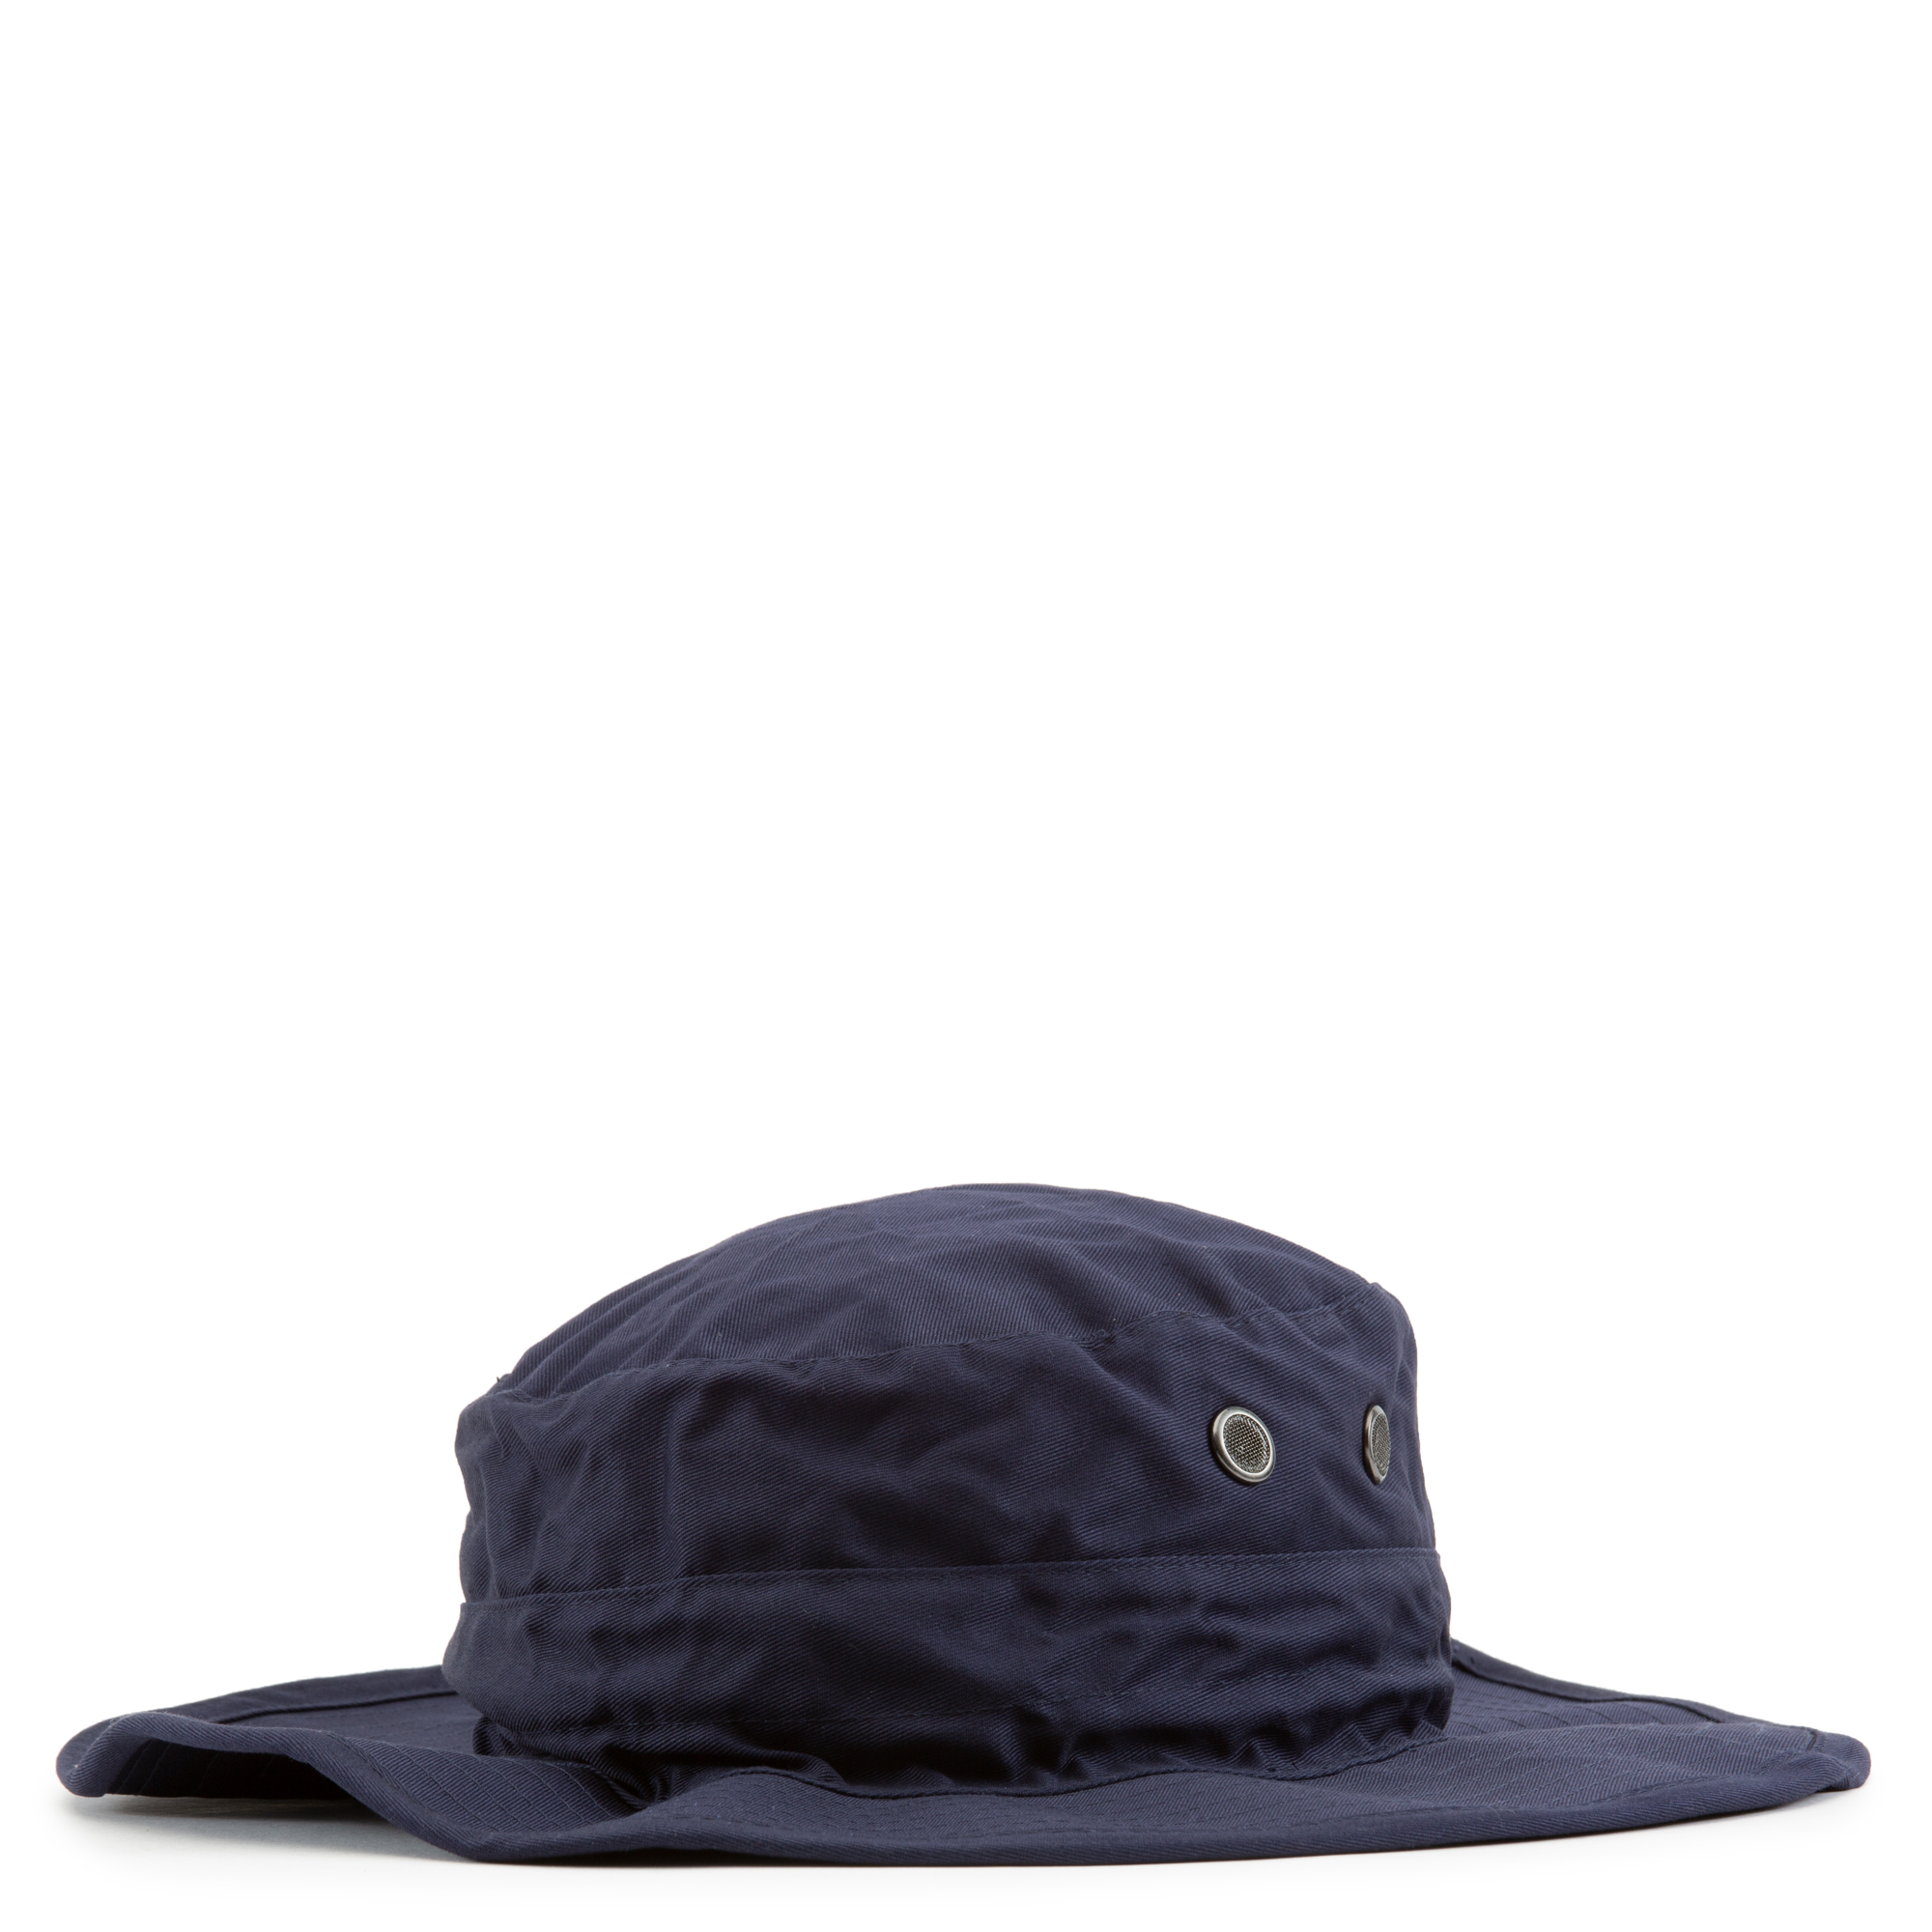 Rothco Adjustable Boonie Hat - Navy Blue